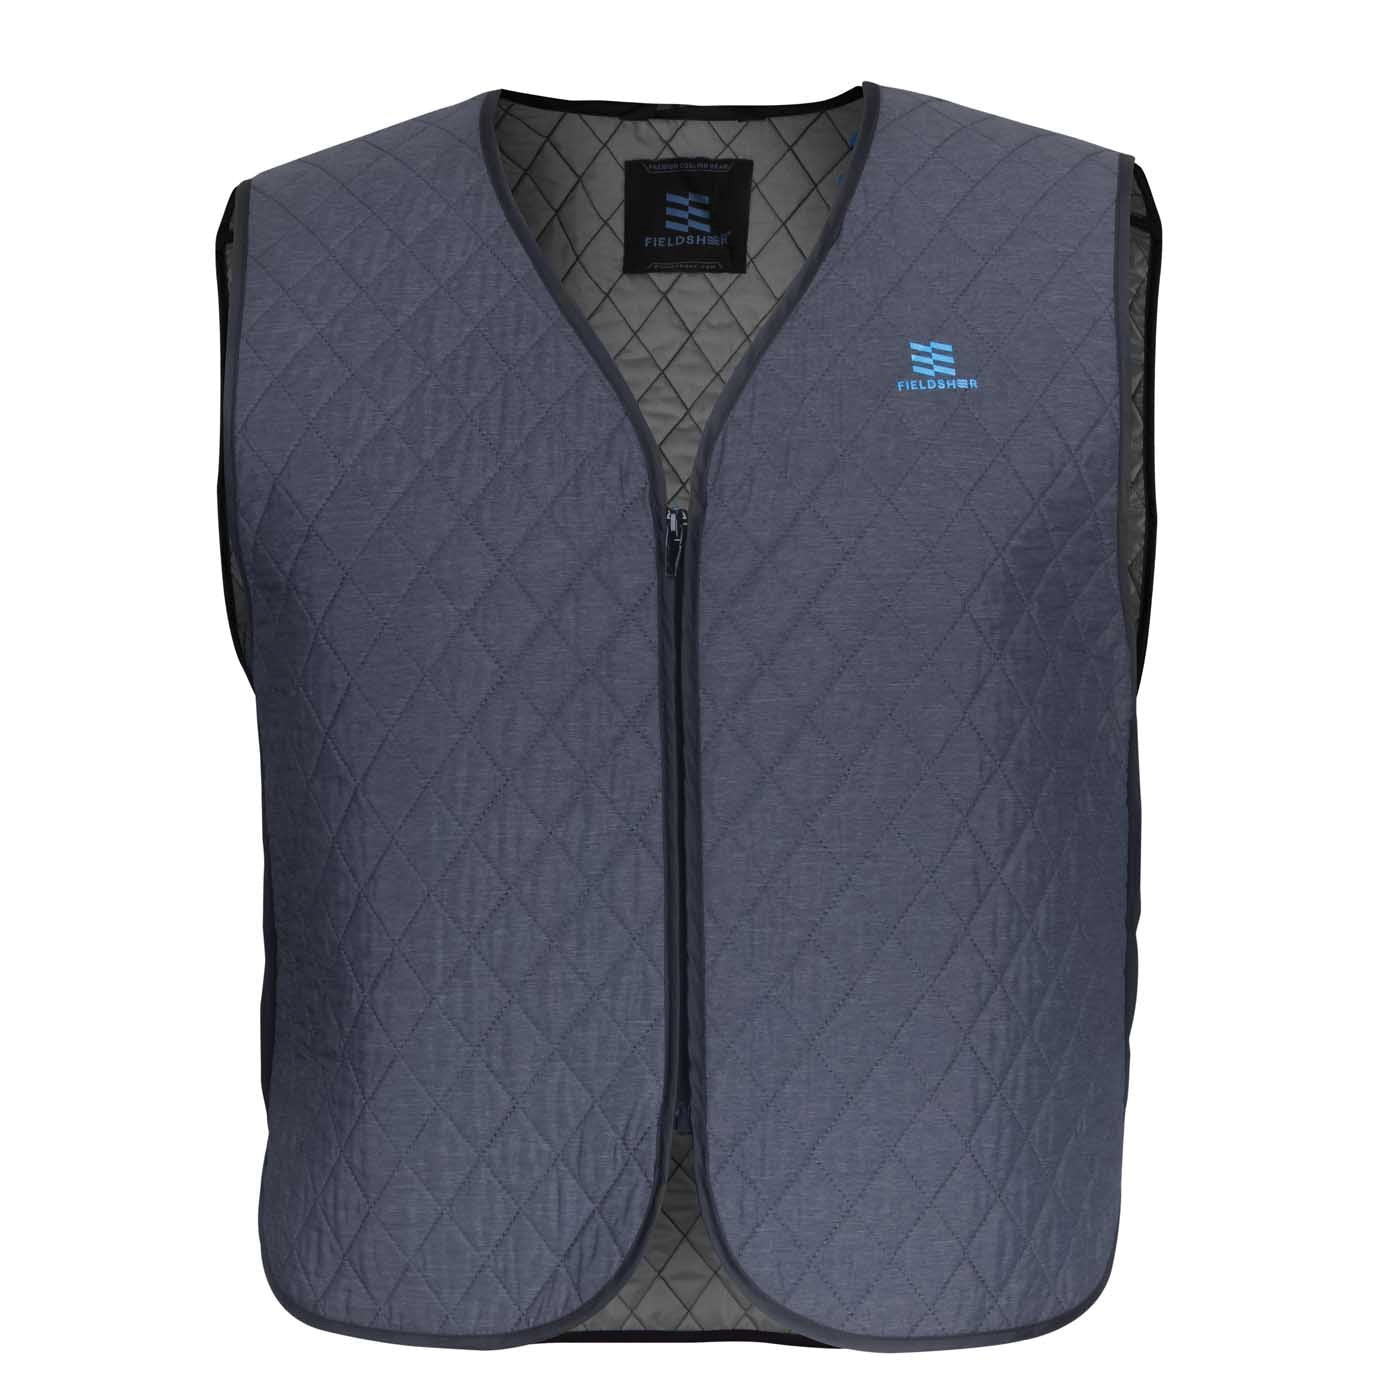 Hydrologic, Mobile Cooling Series MCUV05240621 Vest, 2XL, Polyester, Gray, V-Neck Collar, Zipper Closure